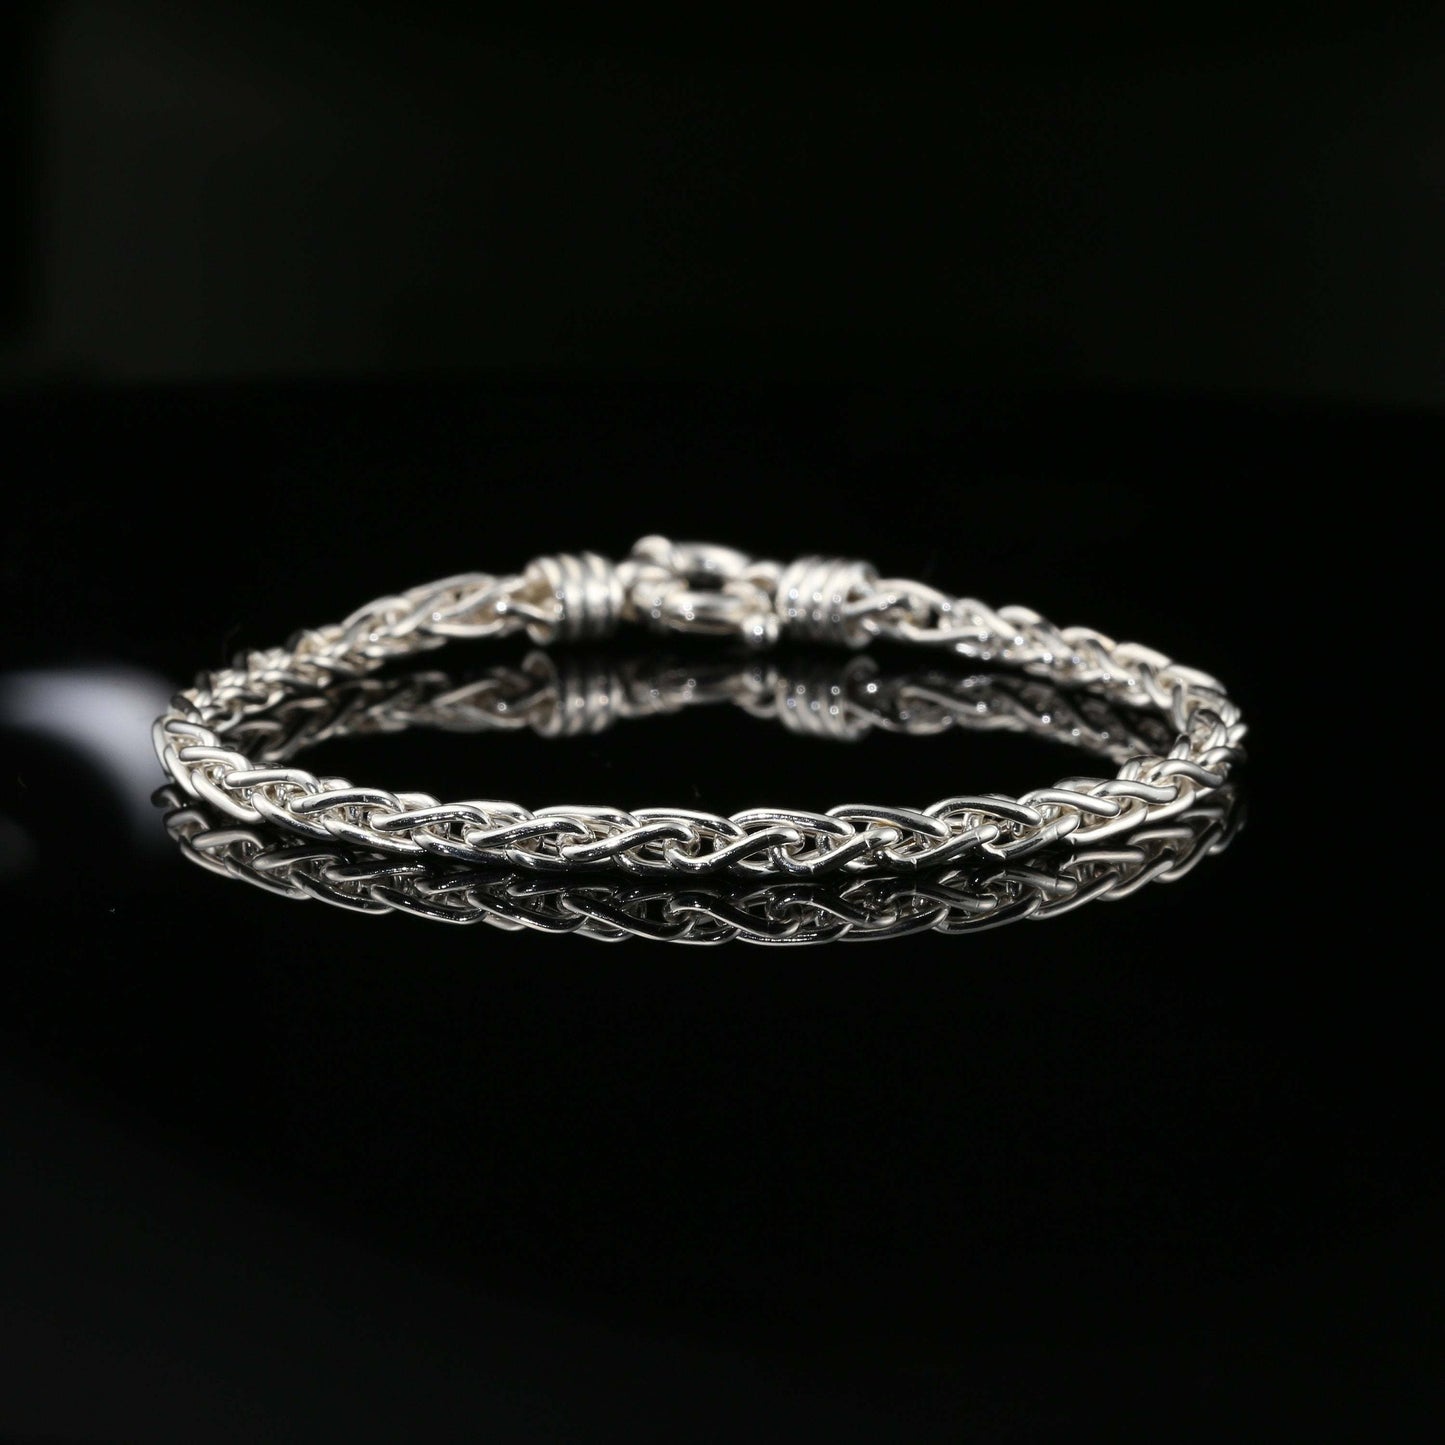 Thin Byzantine Chain Bracelet, Chainmail Jewelry in Sterling Silver, 8.5", Unisex